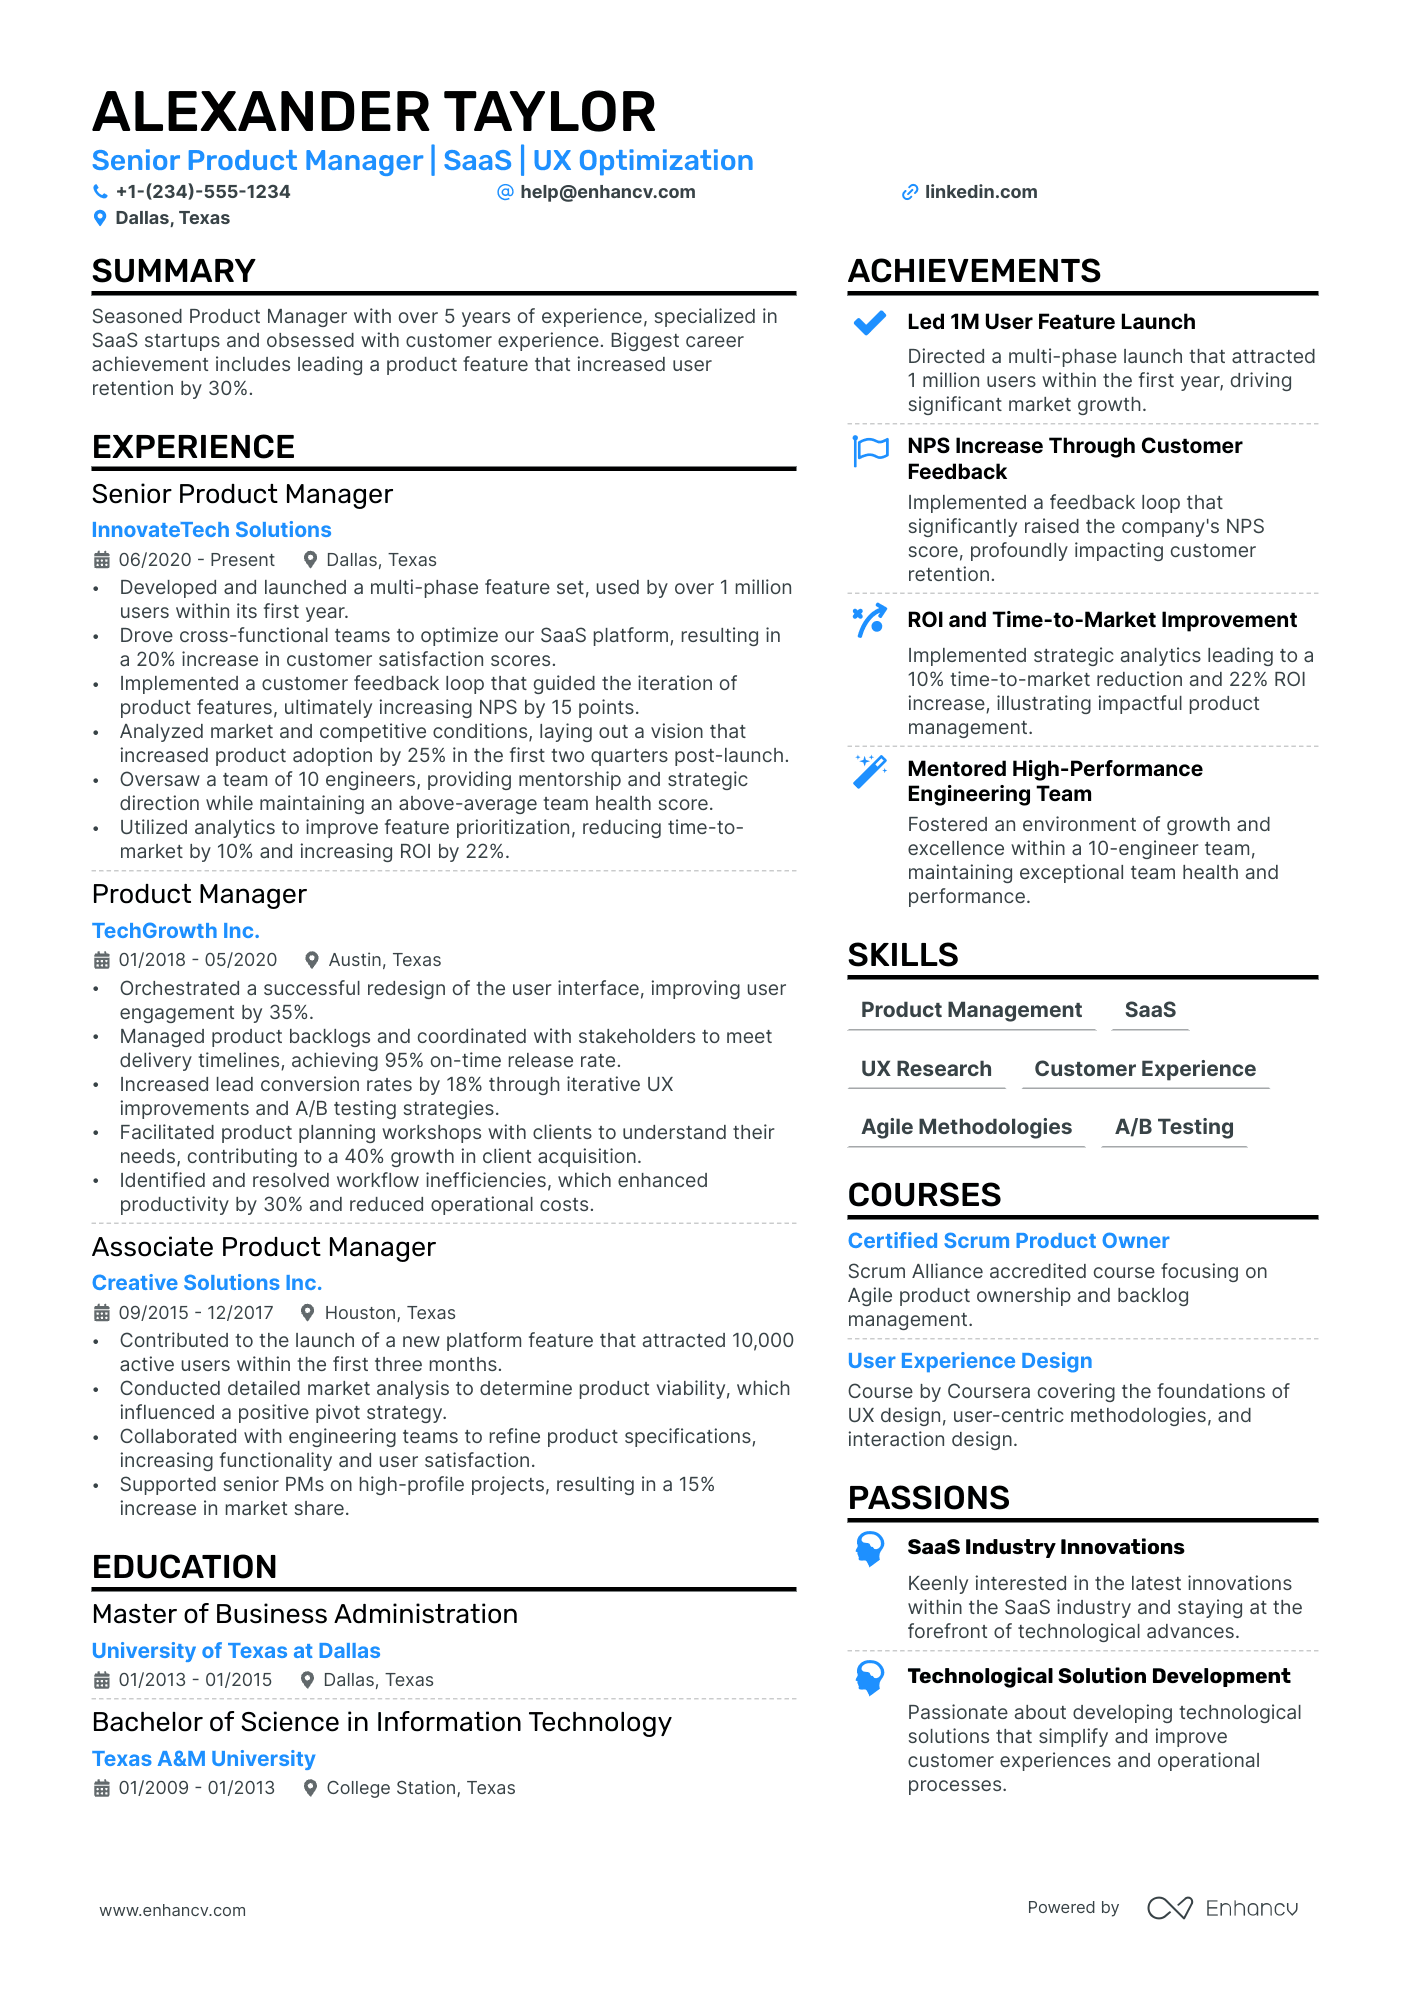 SaaS Product Manager resume example